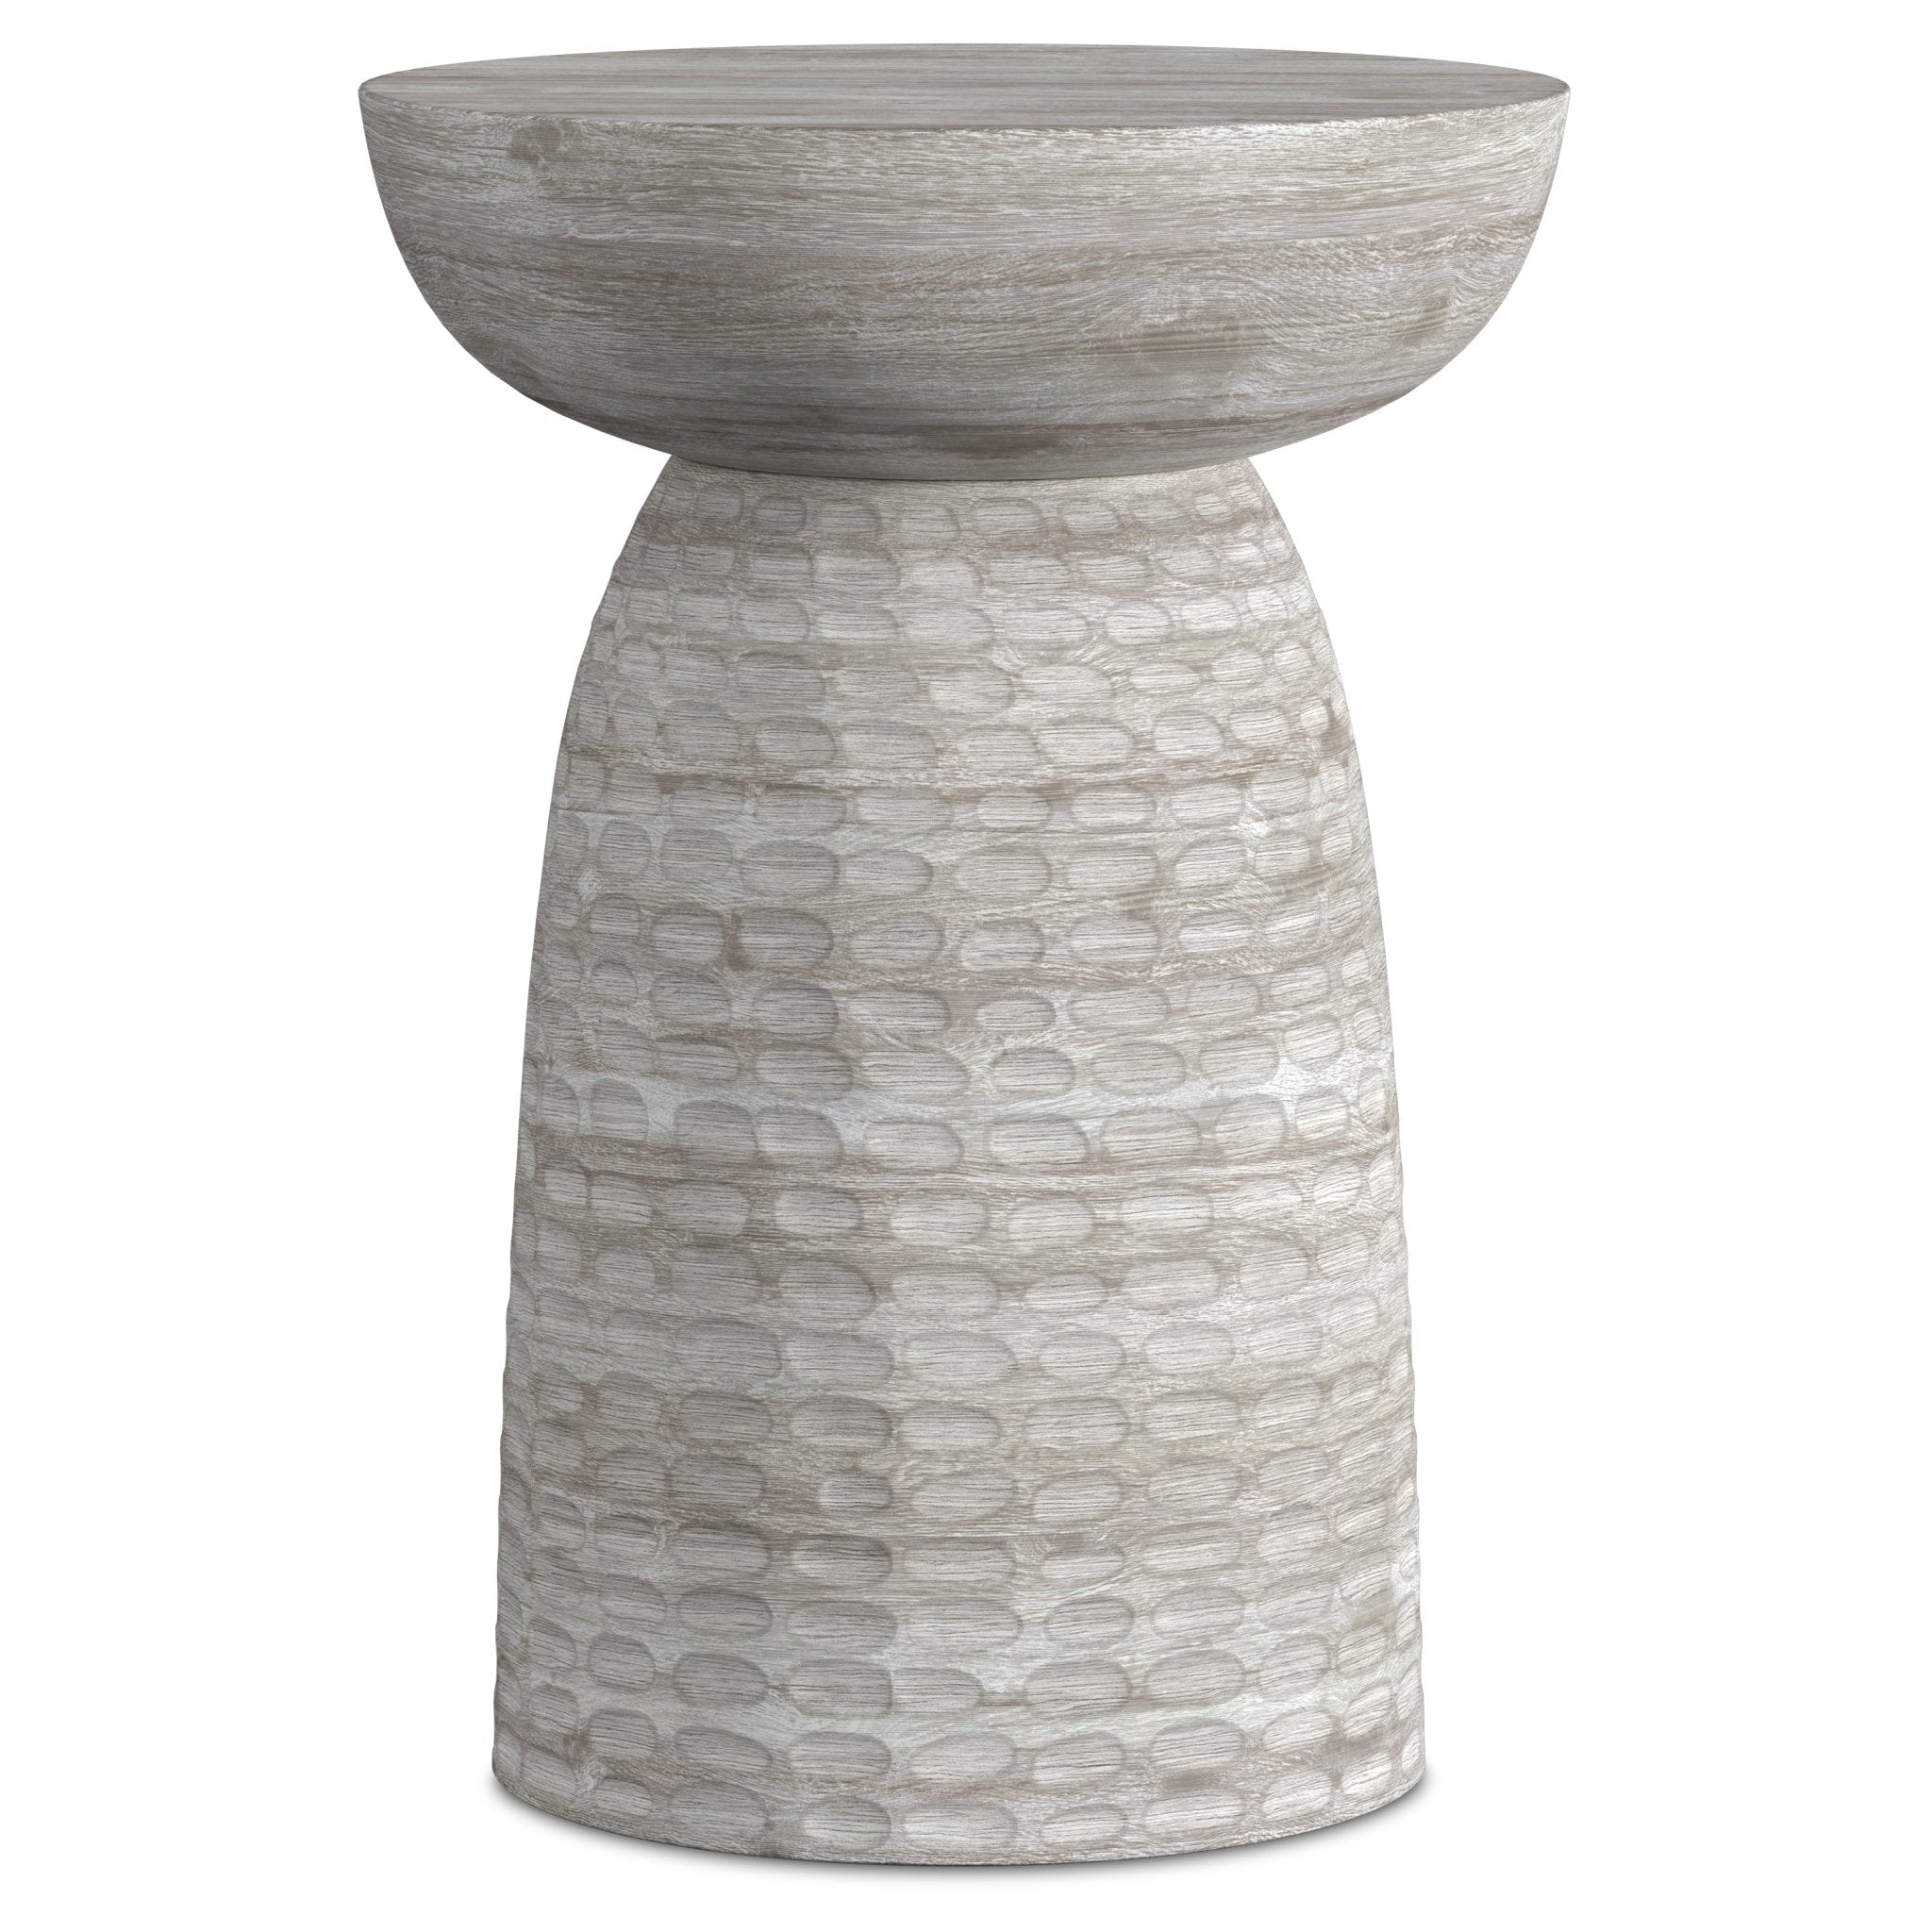 Wooden Accent Table with Sleek Sculptural Design - End Tables